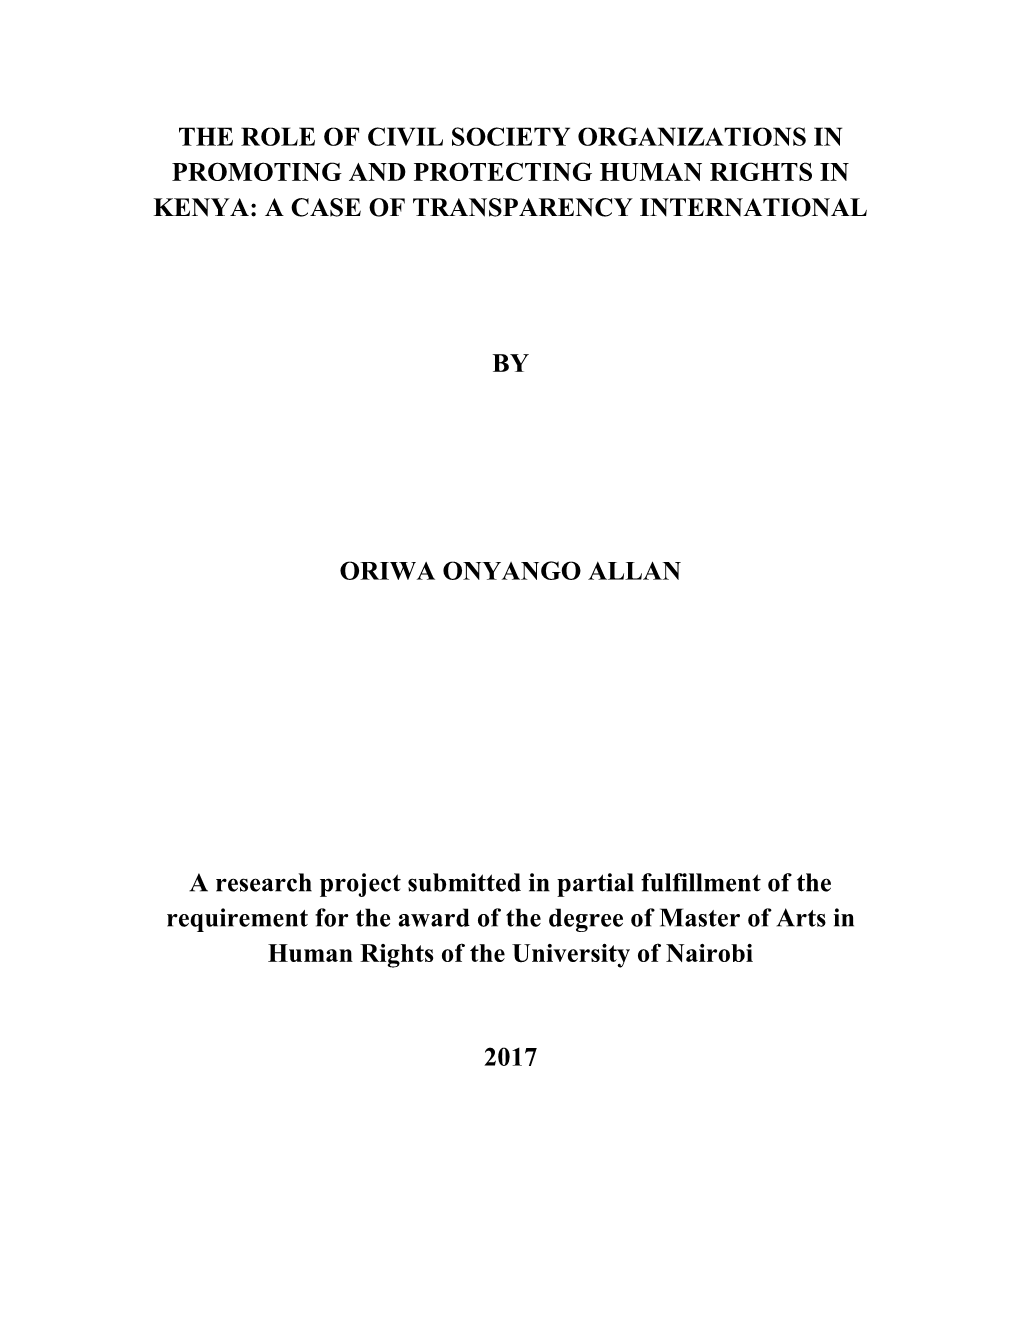 The Role of Civil Society Organizations in Promoting and Protecting Human Rights in Kenya: a Case of Transparency International